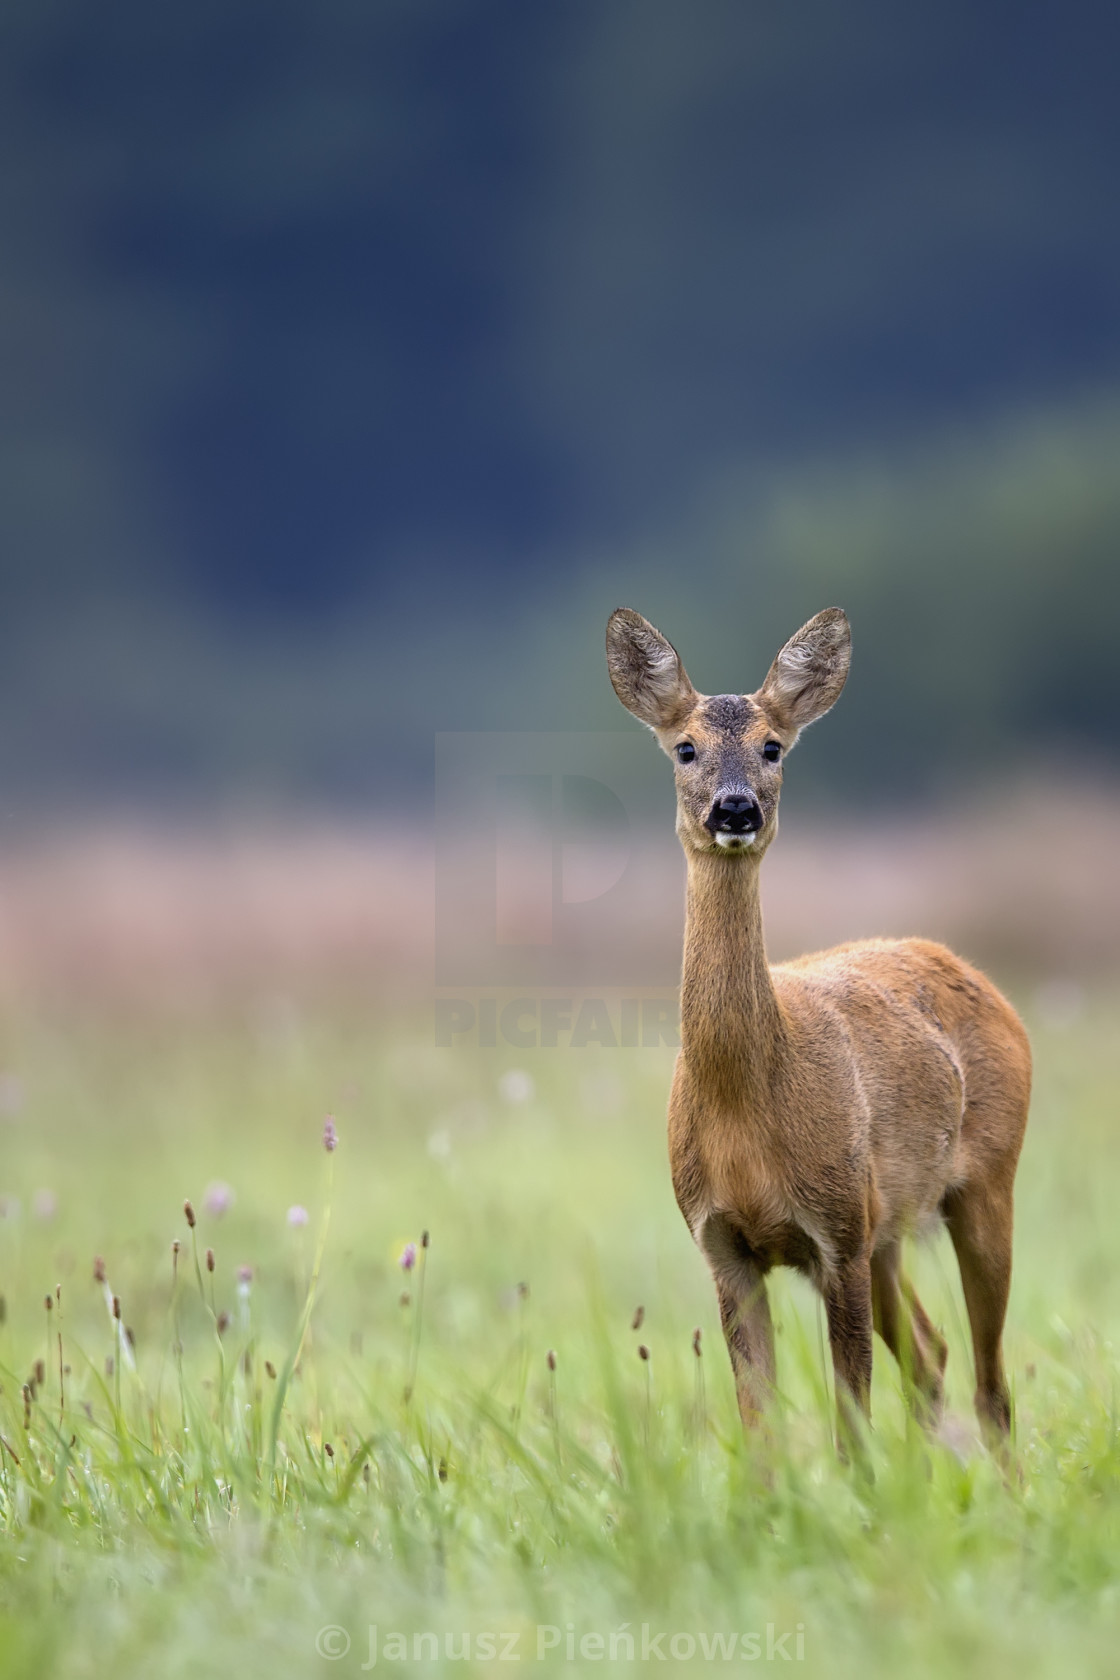 "Roe deer in a clearing in the wild" stock image